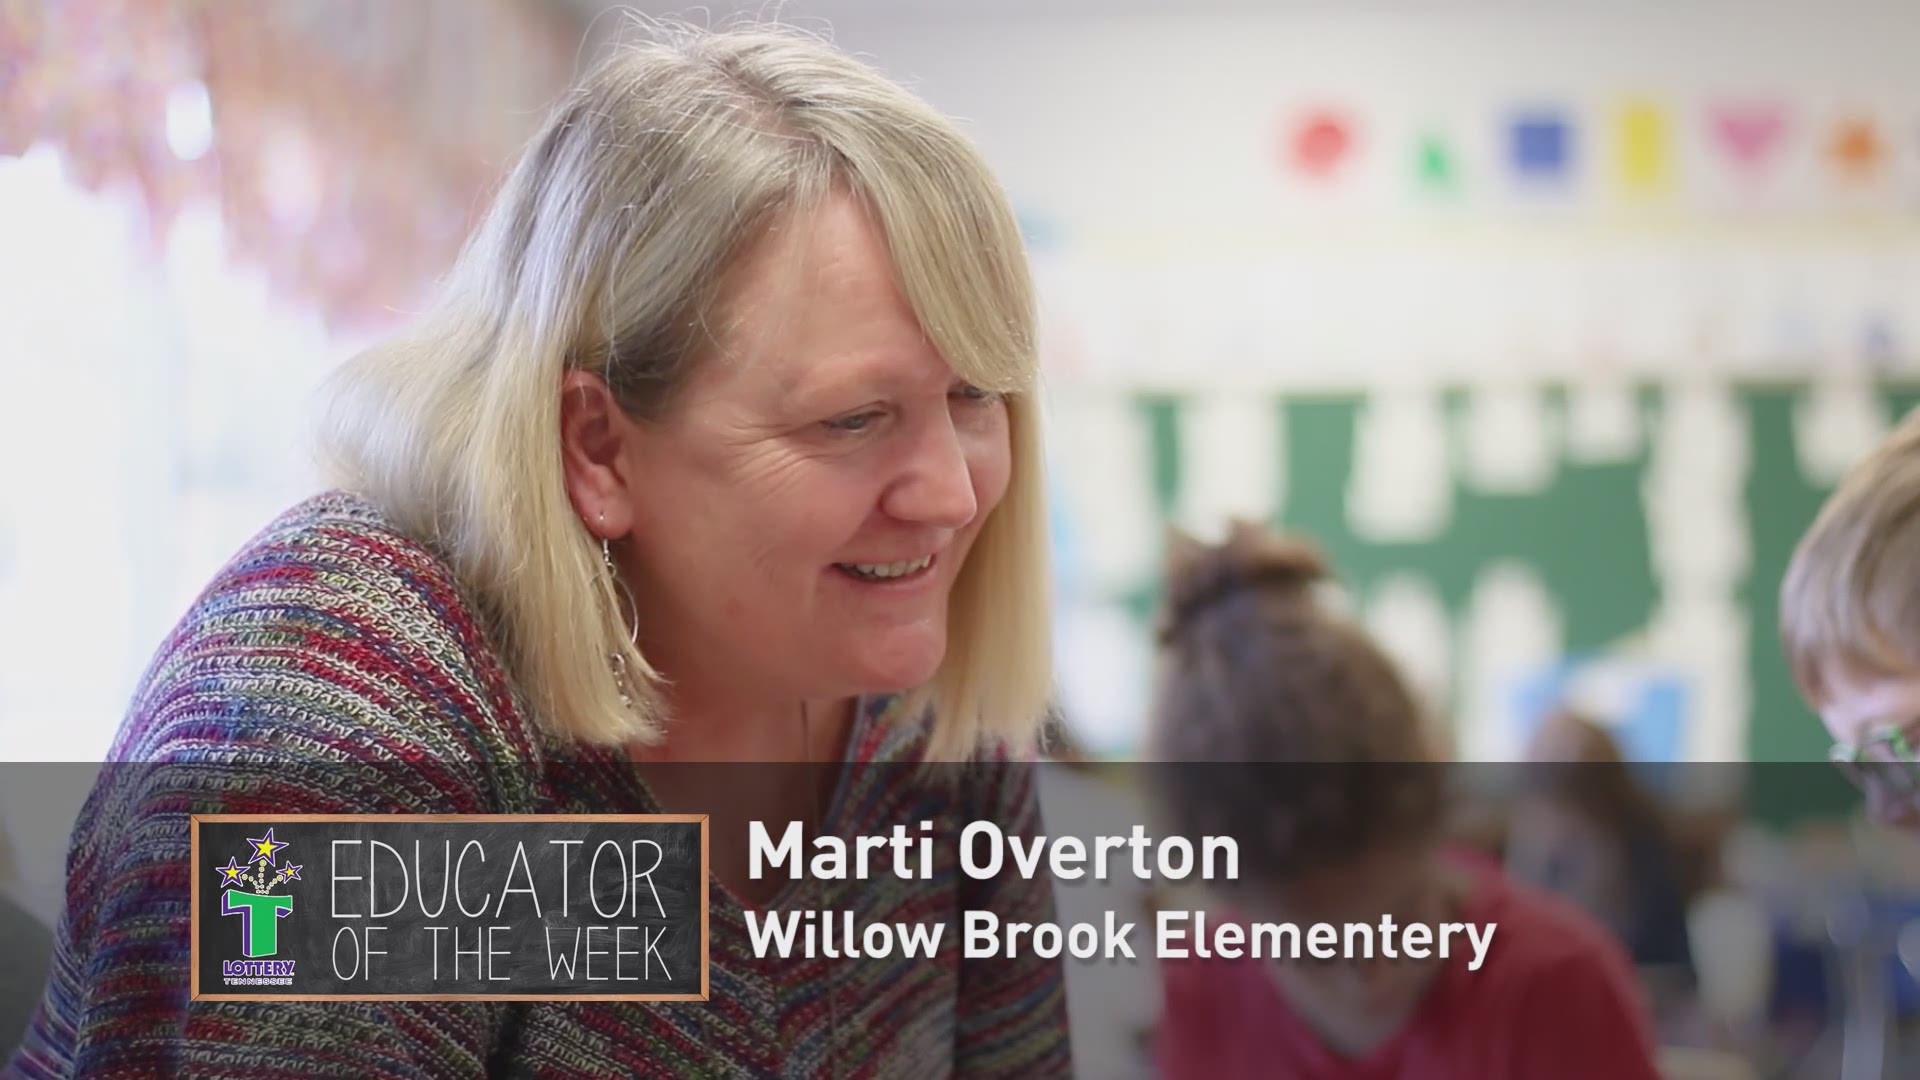 The Educator of the Week 10/9 is Marti Overton